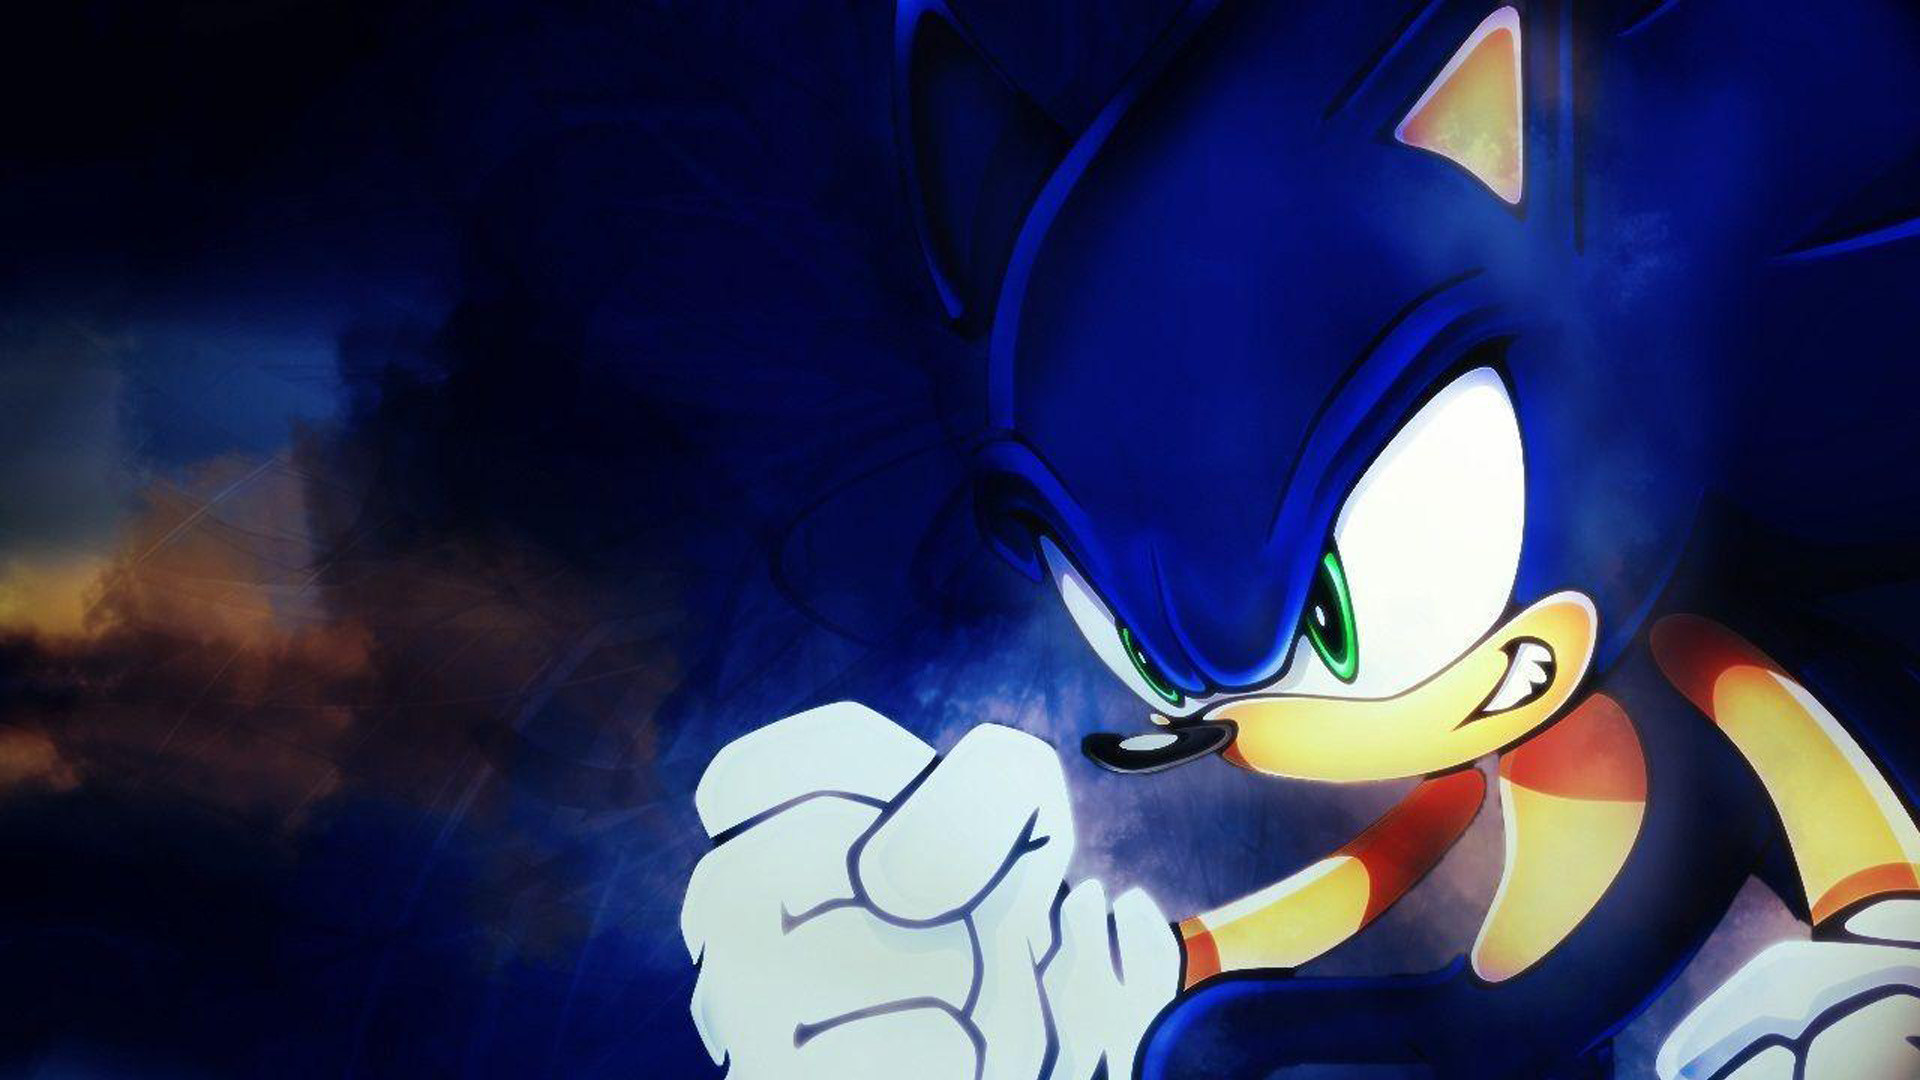 Angry Face Of Sonic The Hedgehog 2K Sonic